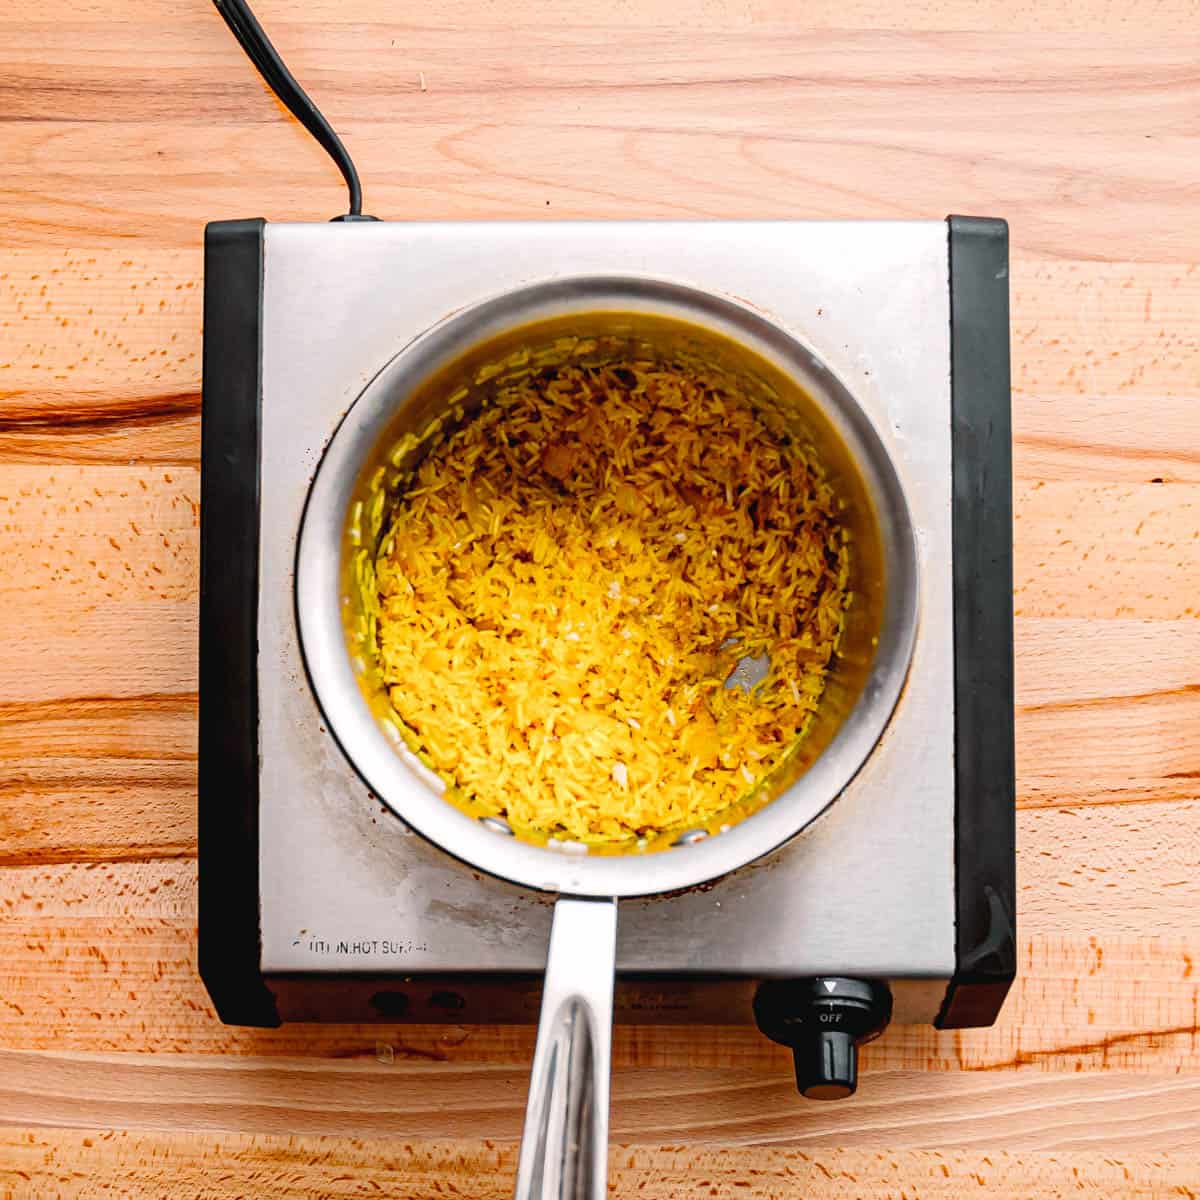 Add turmeric and stir the rice until it is fully coated with turmeric. 